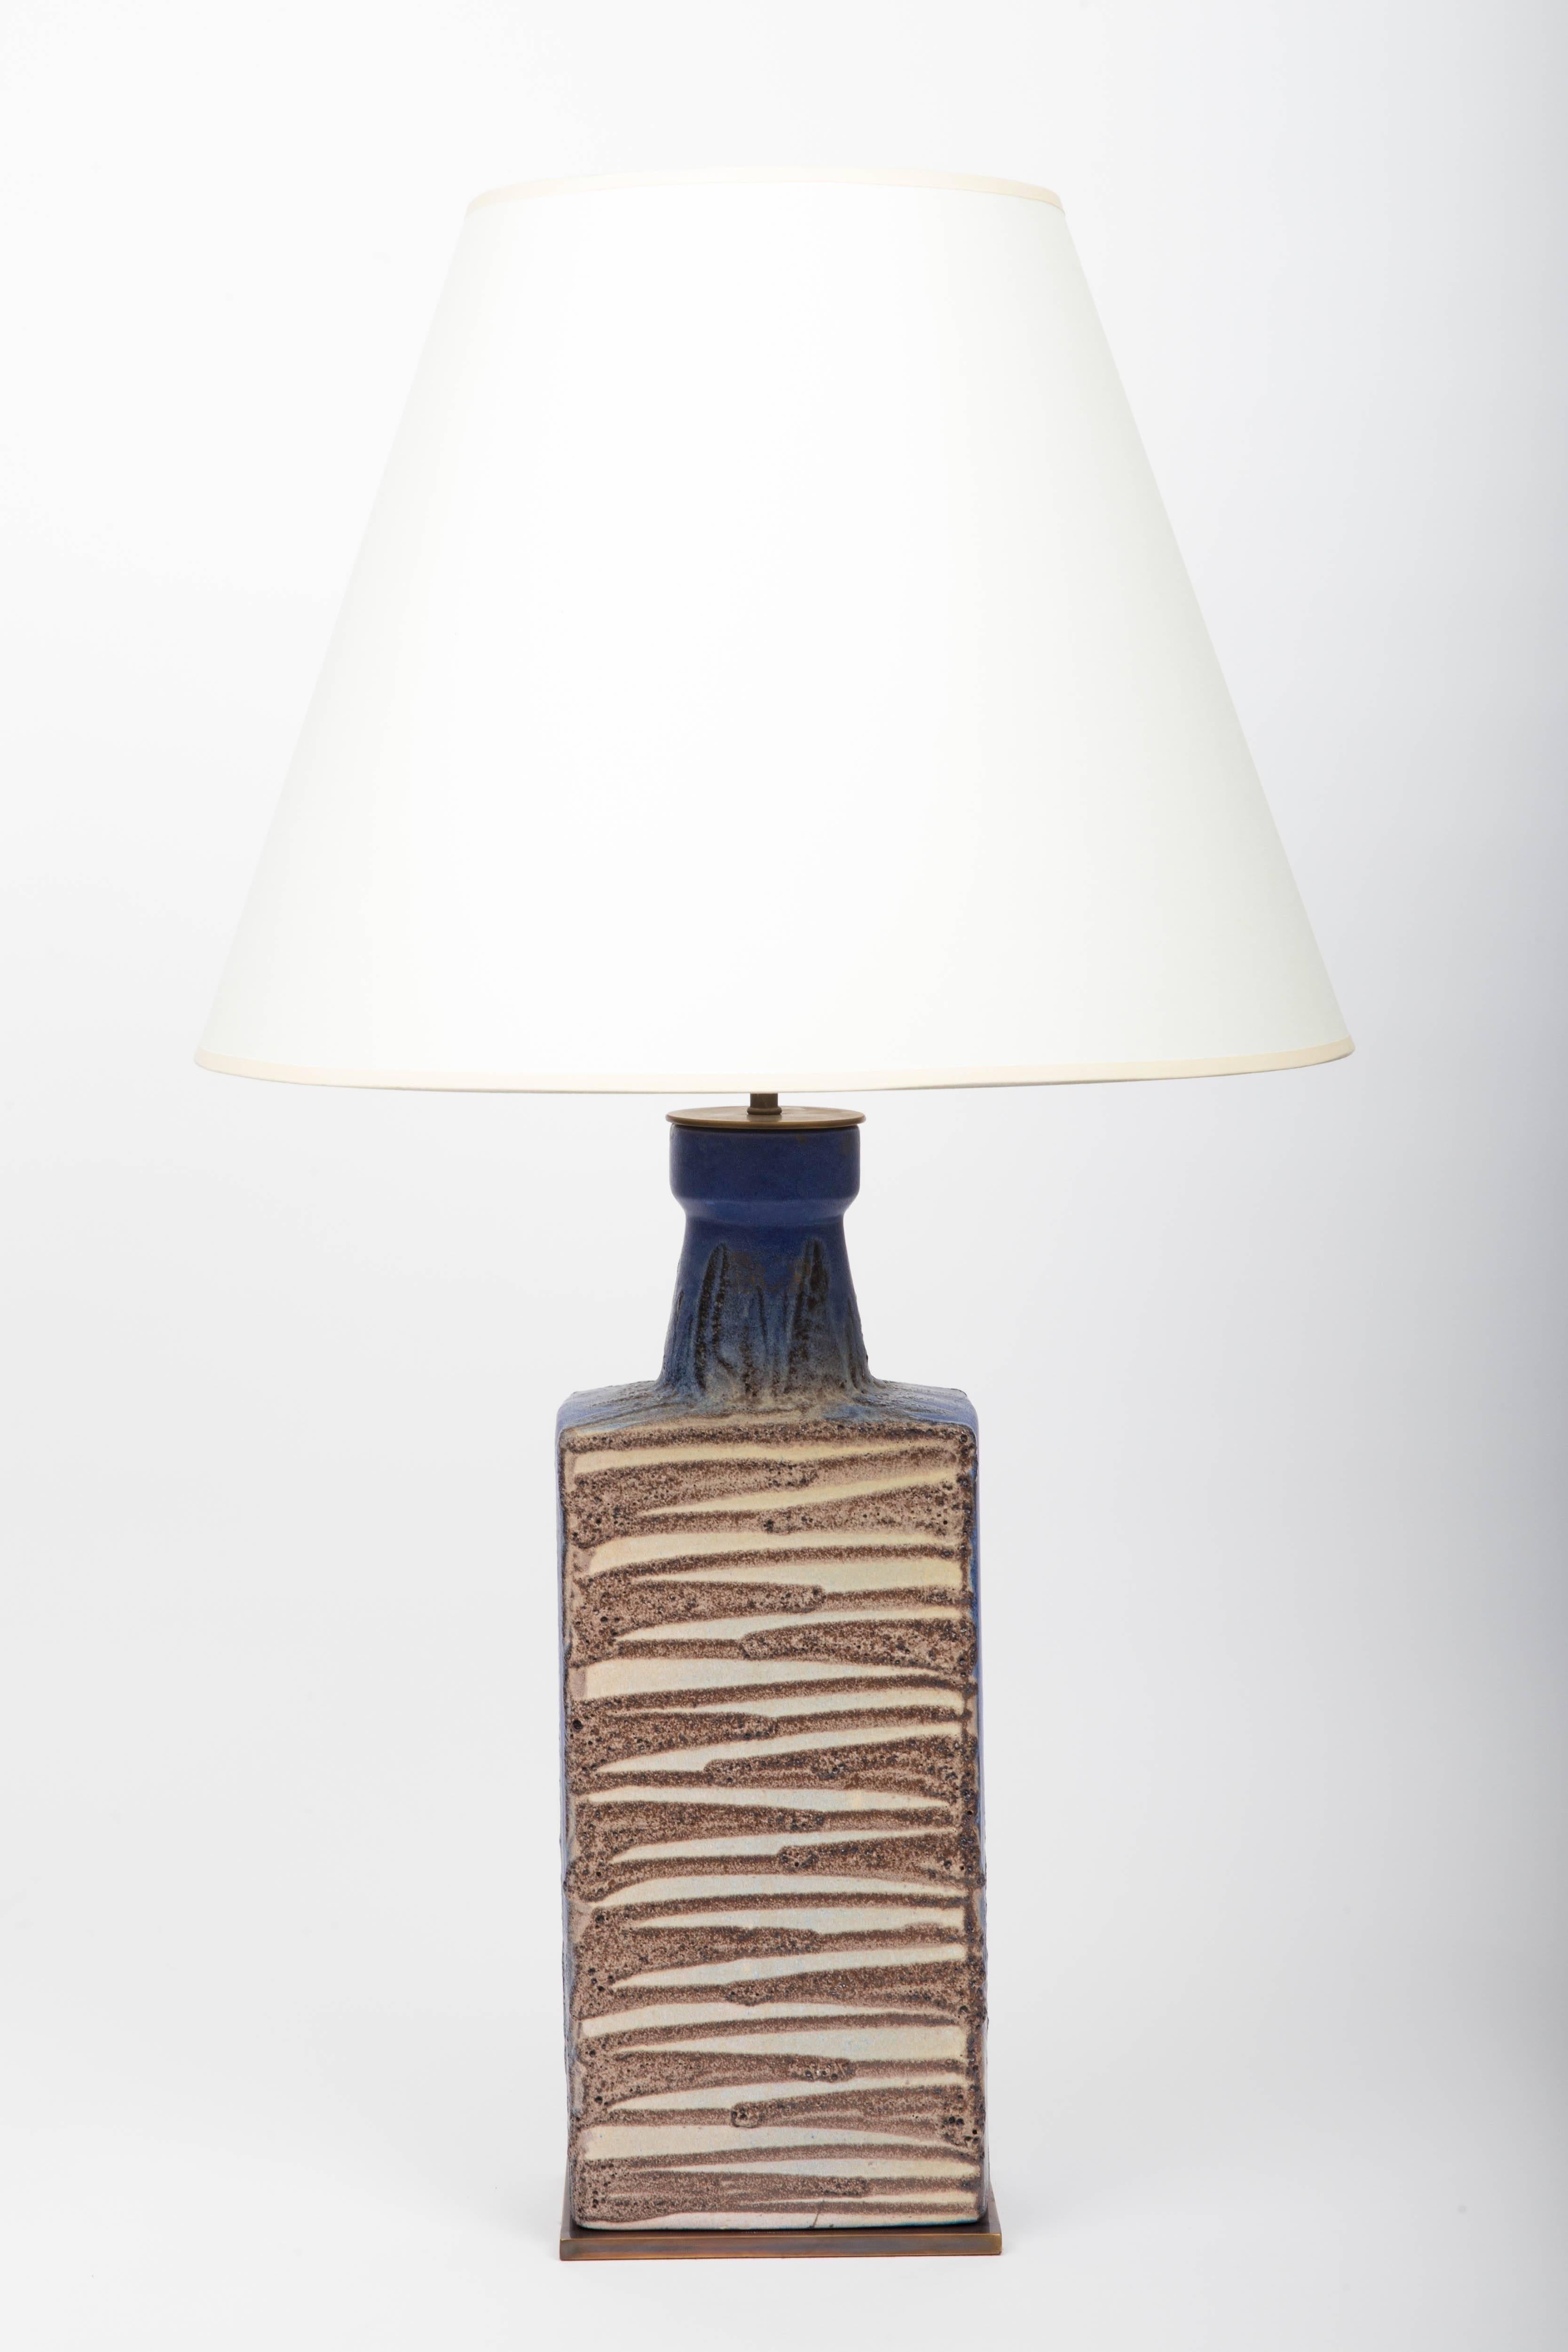 Blue and brown ceramic vase converted into lamp, 20th century

Shade not included
Newly rewired with black twisted silk cord and bronze finish on fittings.